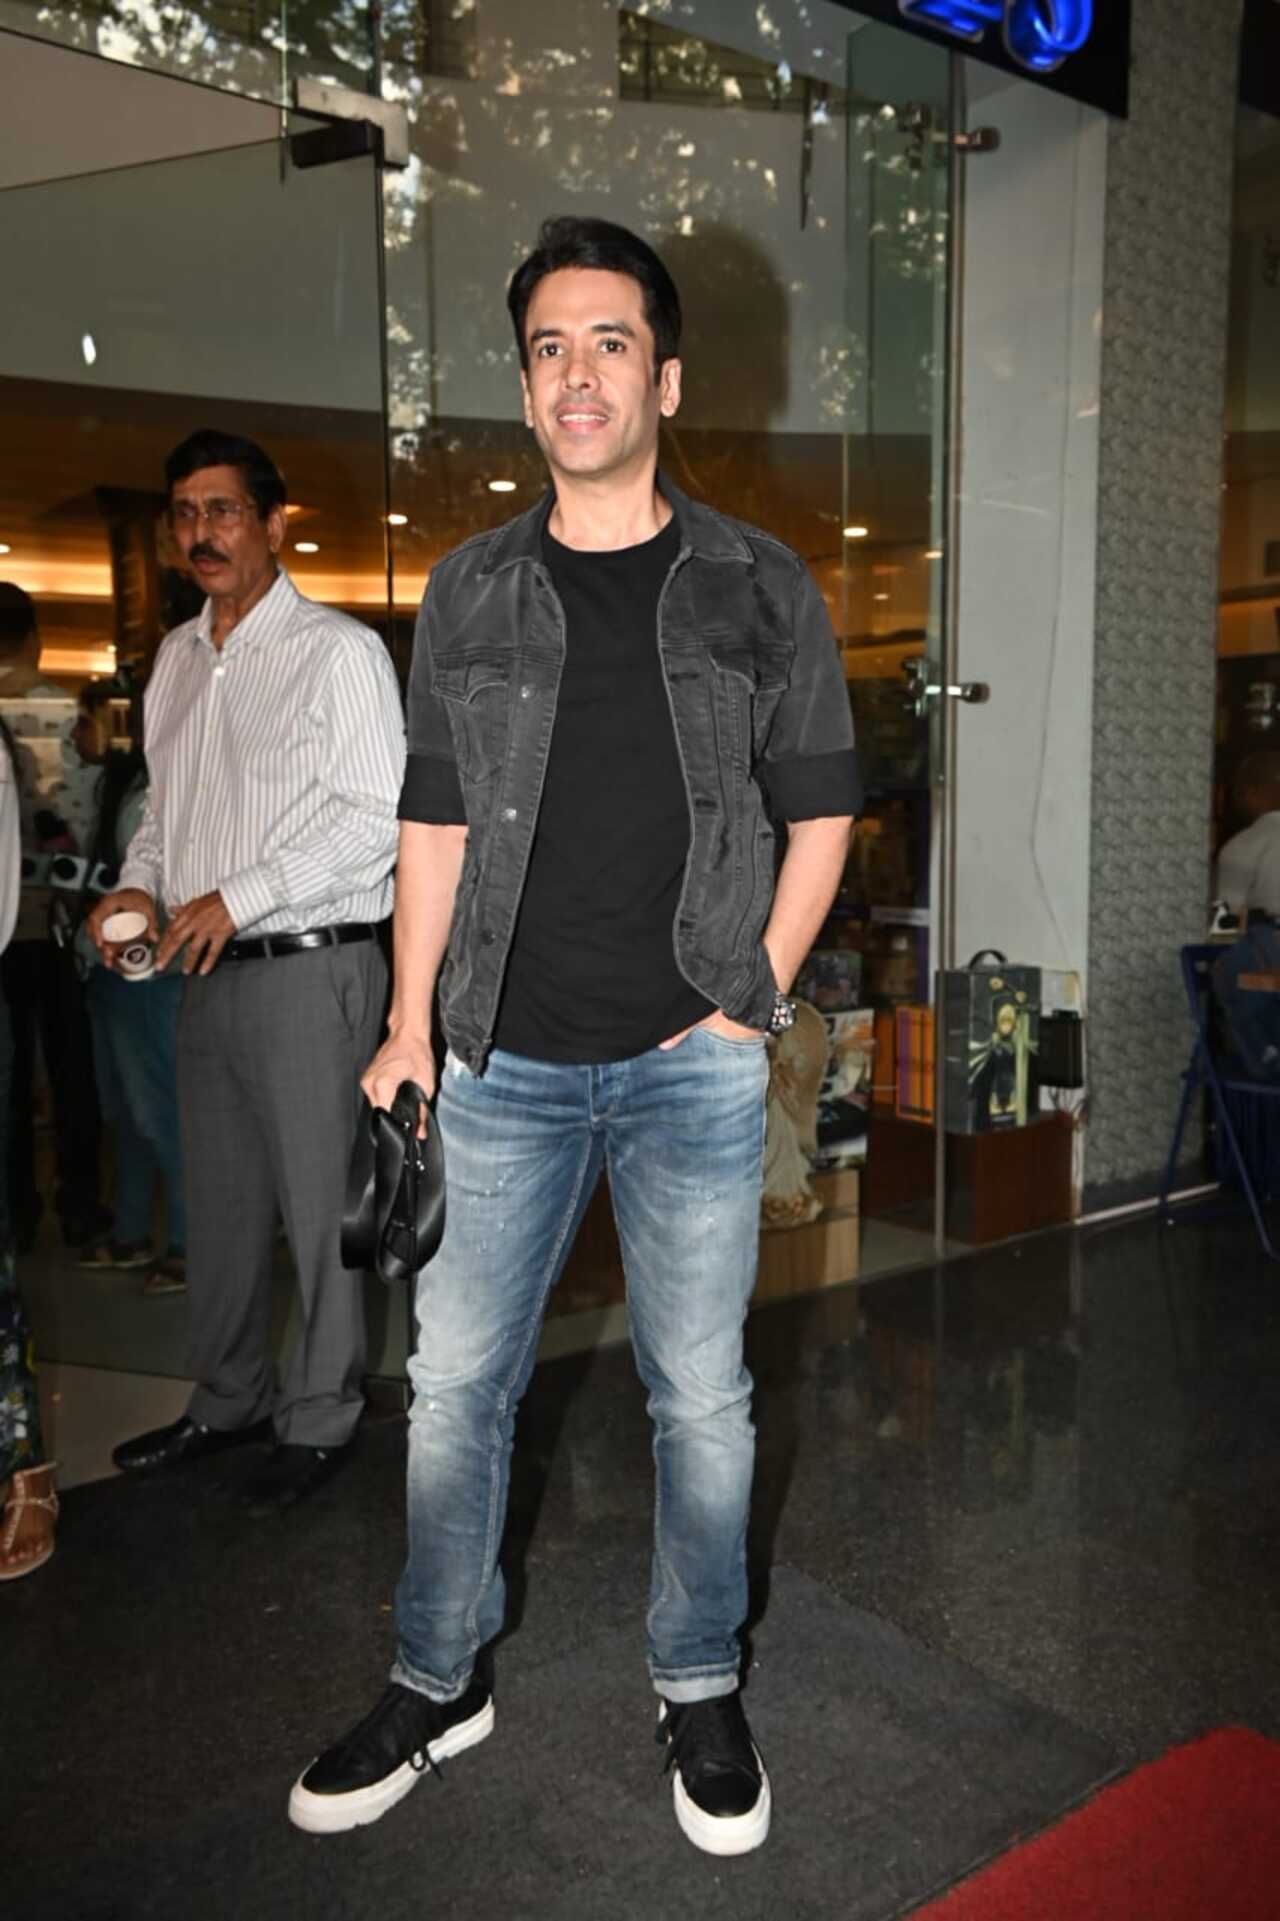 Tusshar Kapoor was also at the book launch